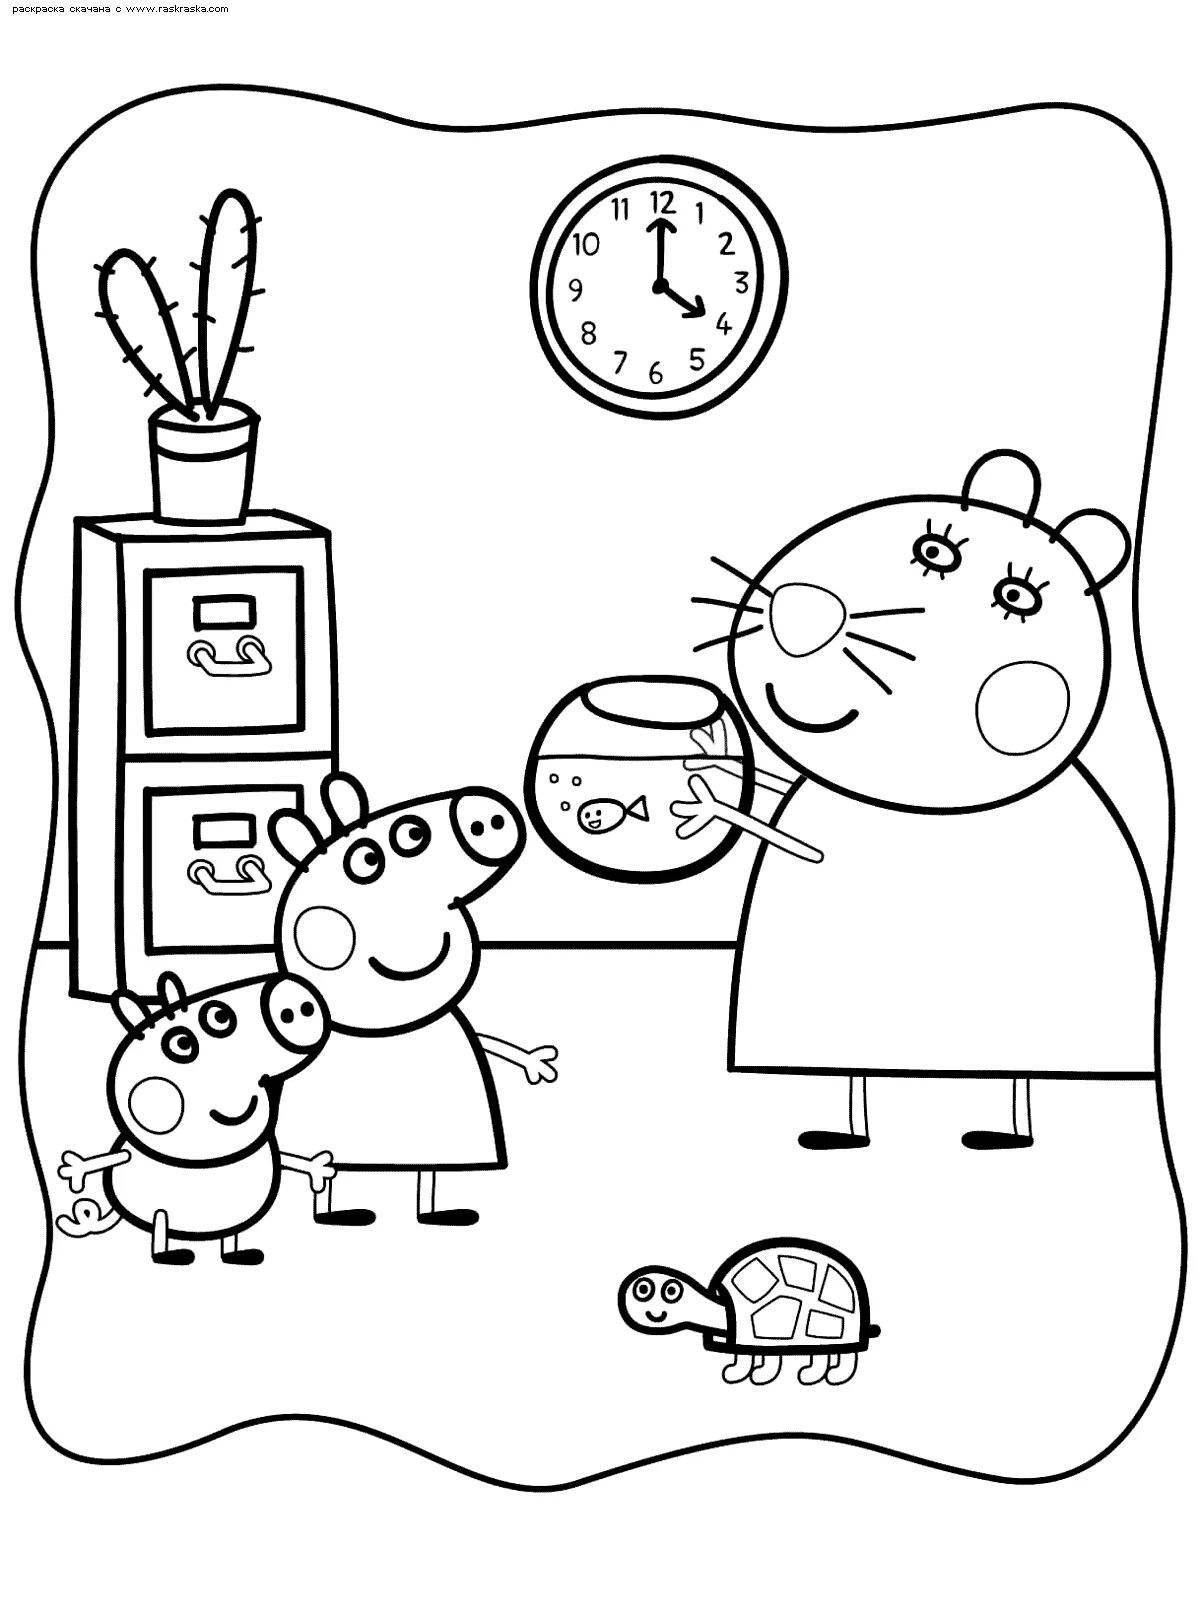 Coloring page adorable peppa pig